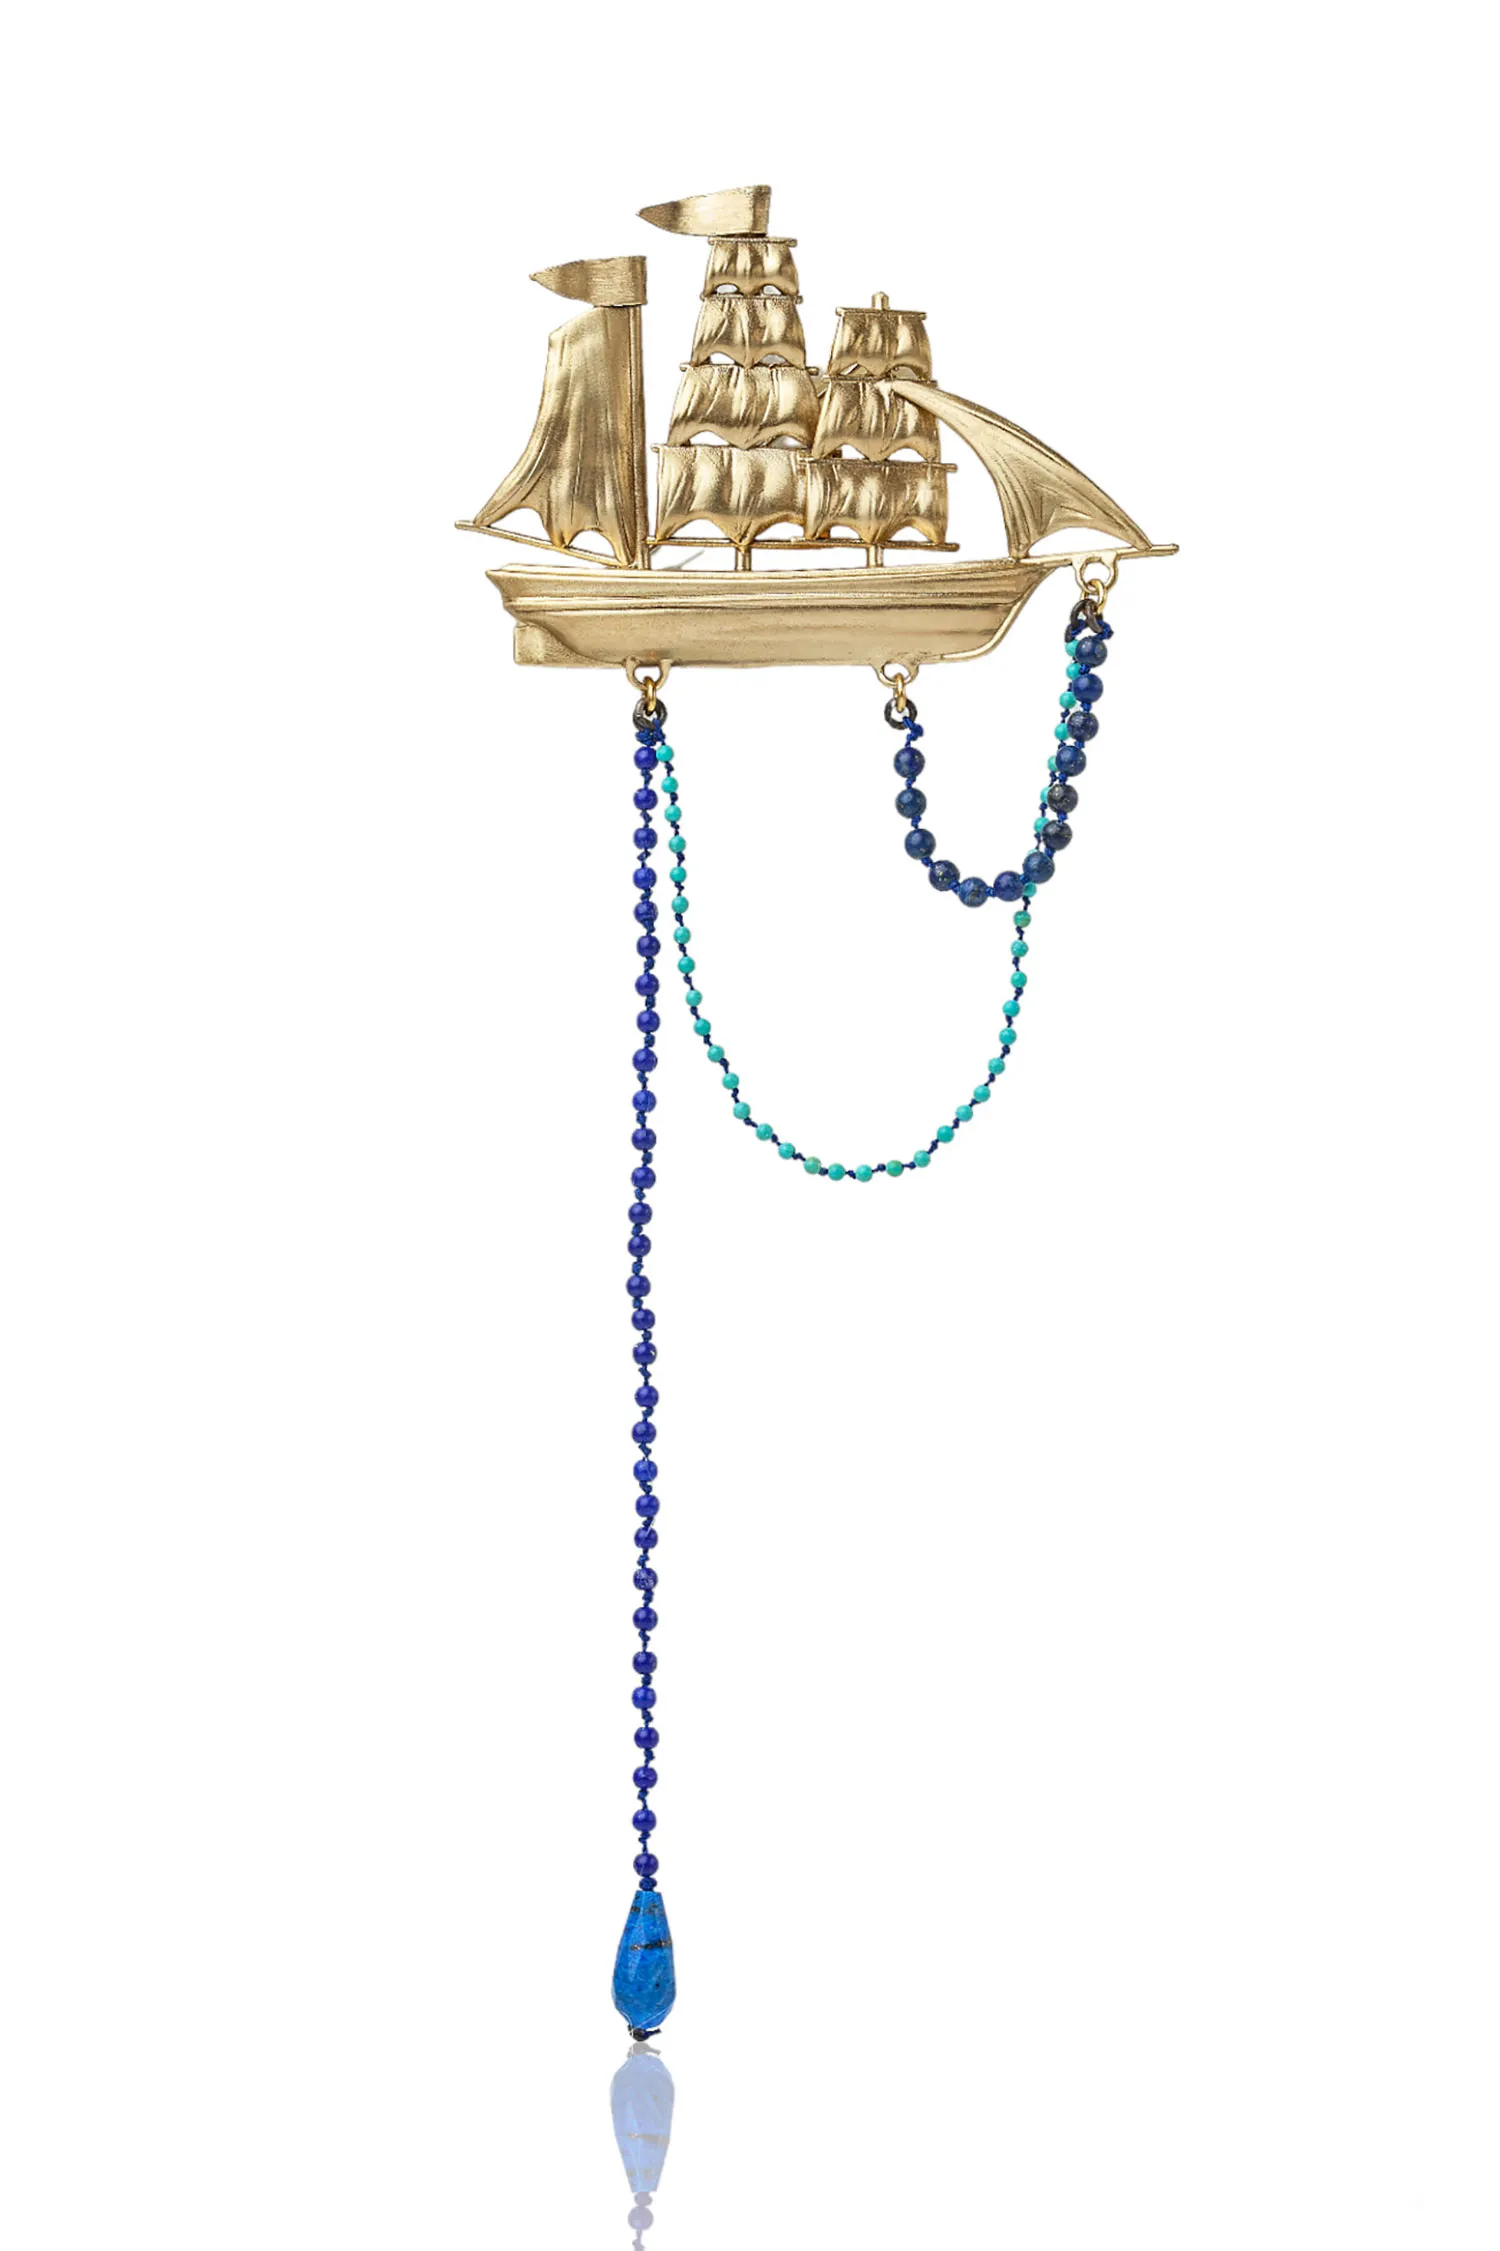 Handmade Jewellery | Sailing boat bronze brooch combined with lapis lazuli and quartz gallery 2